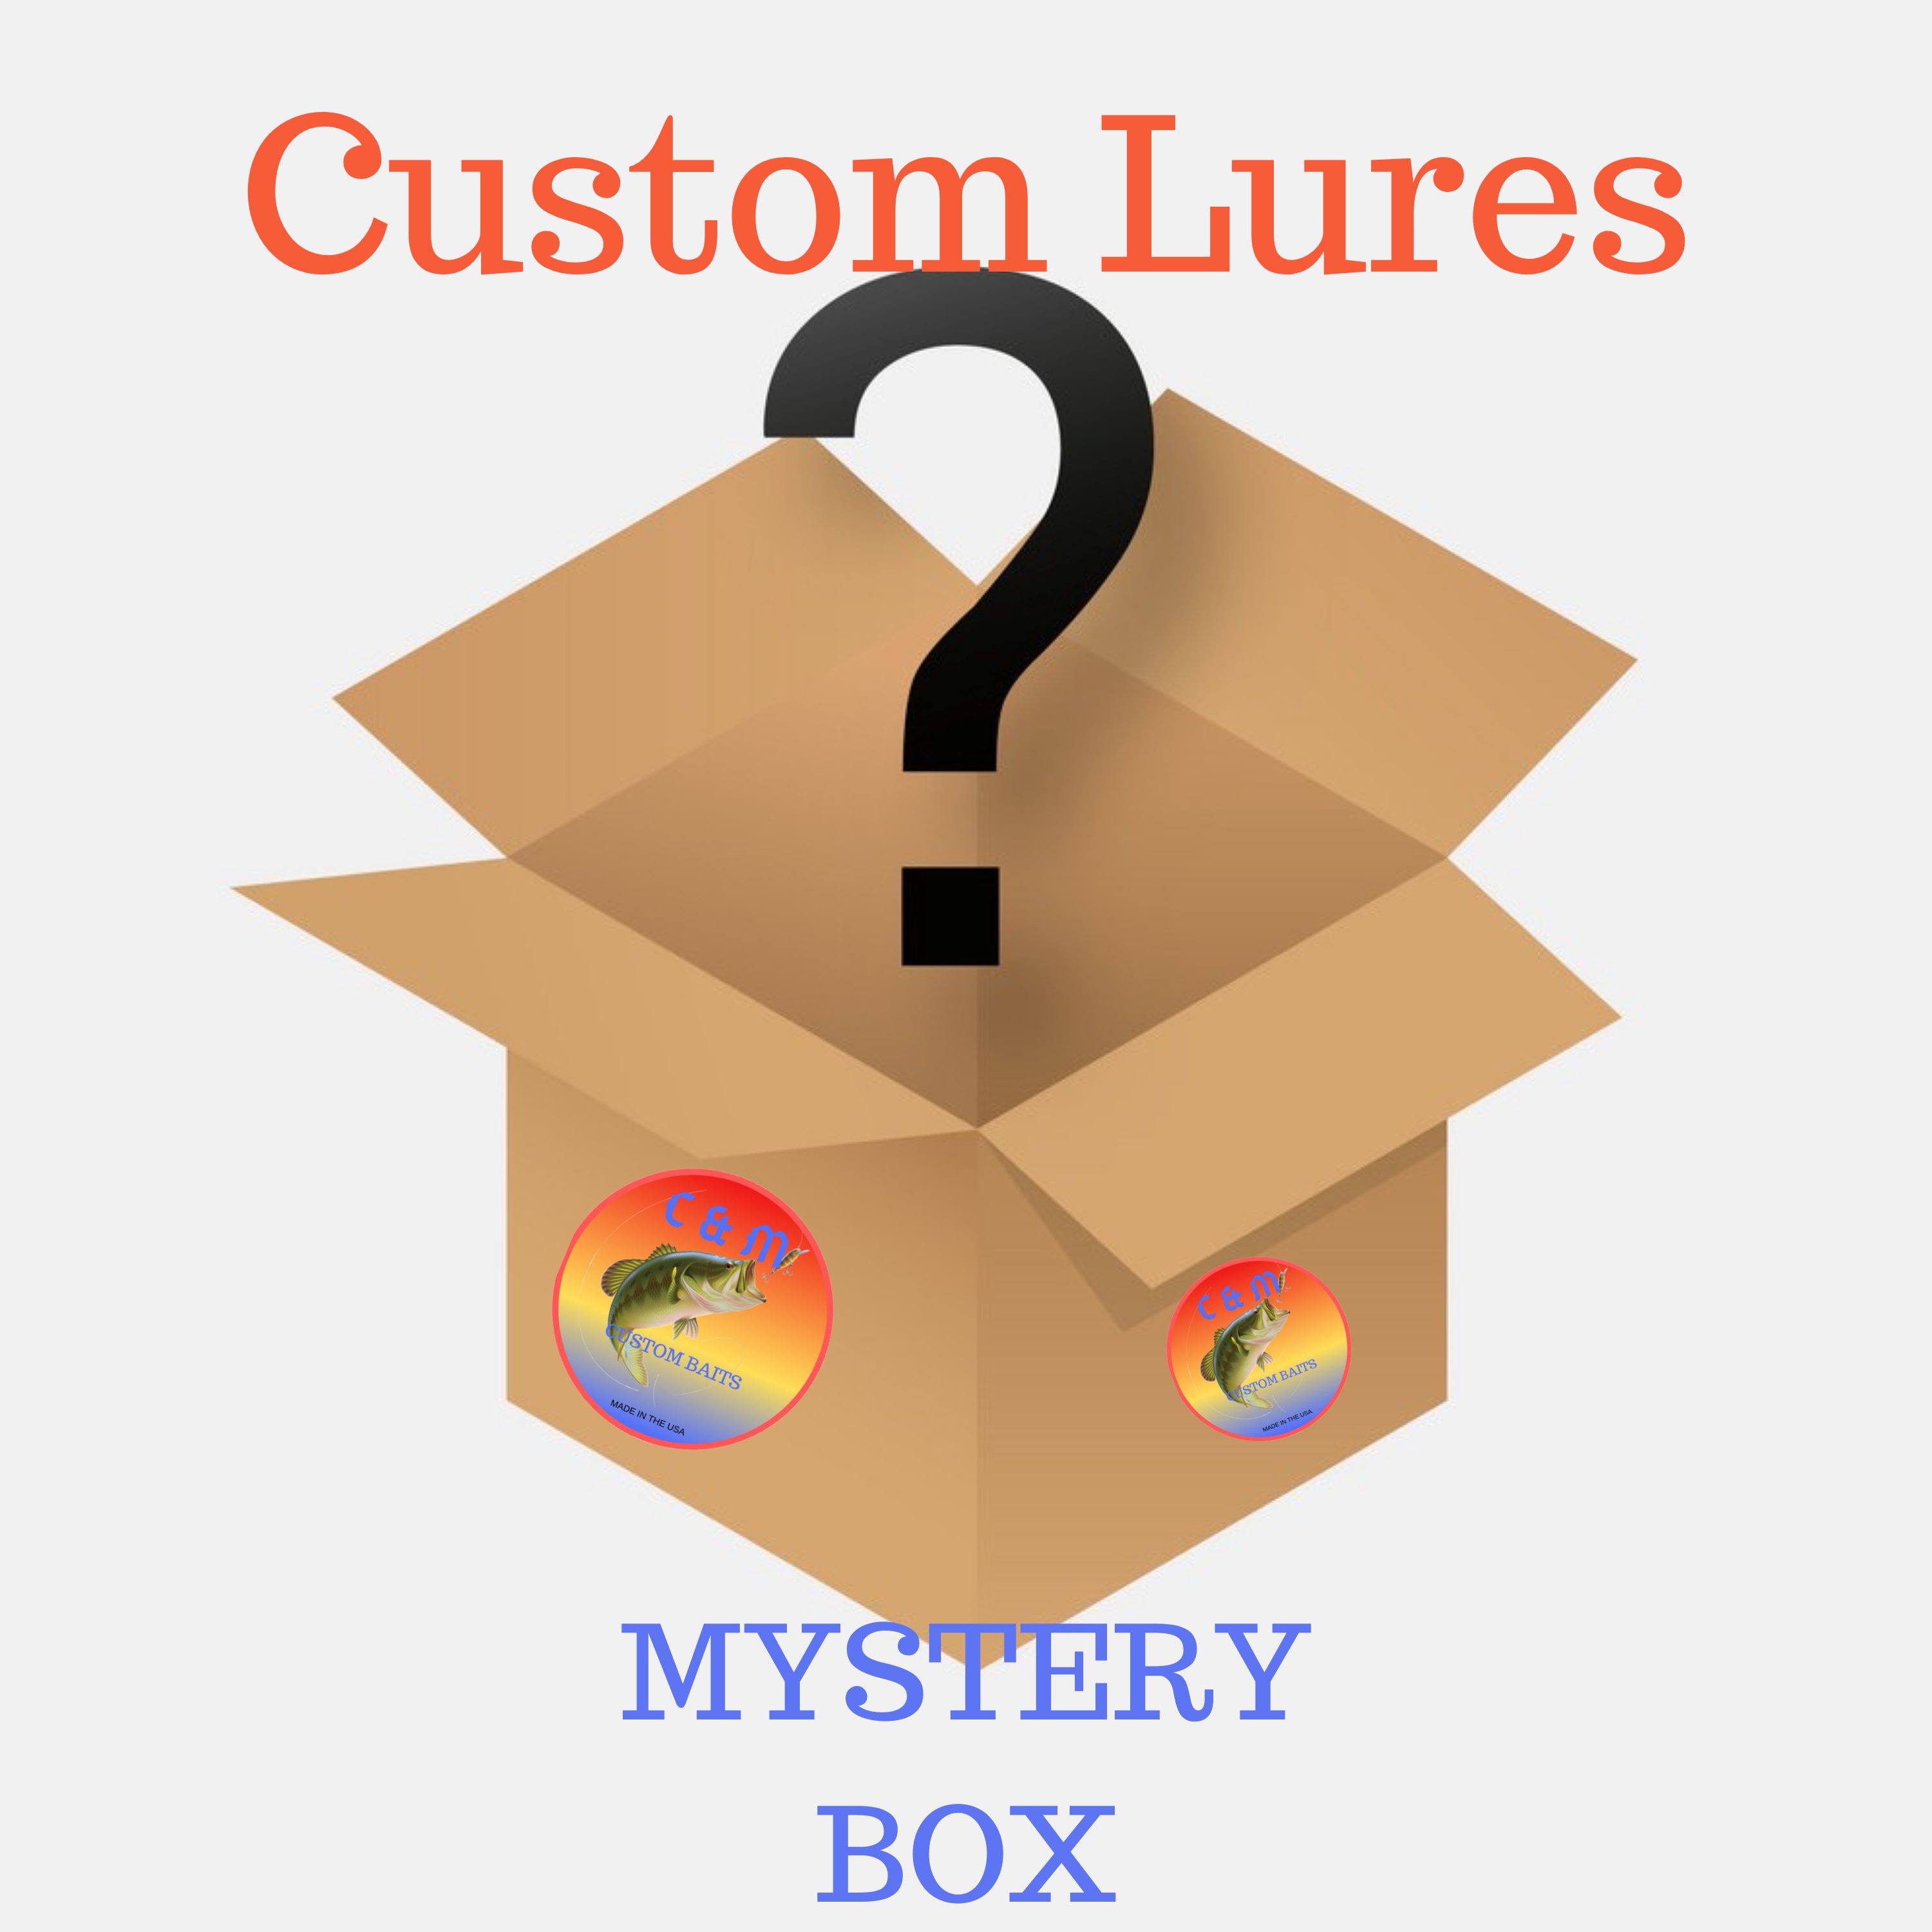 Mystery Box of Custom Fishing Lures C and M Hand Crafted Lures, Jigs,  Spinner Baits Ect. Fishing Tackle, Bass Fishing Gift Idea. -  Hong Kong